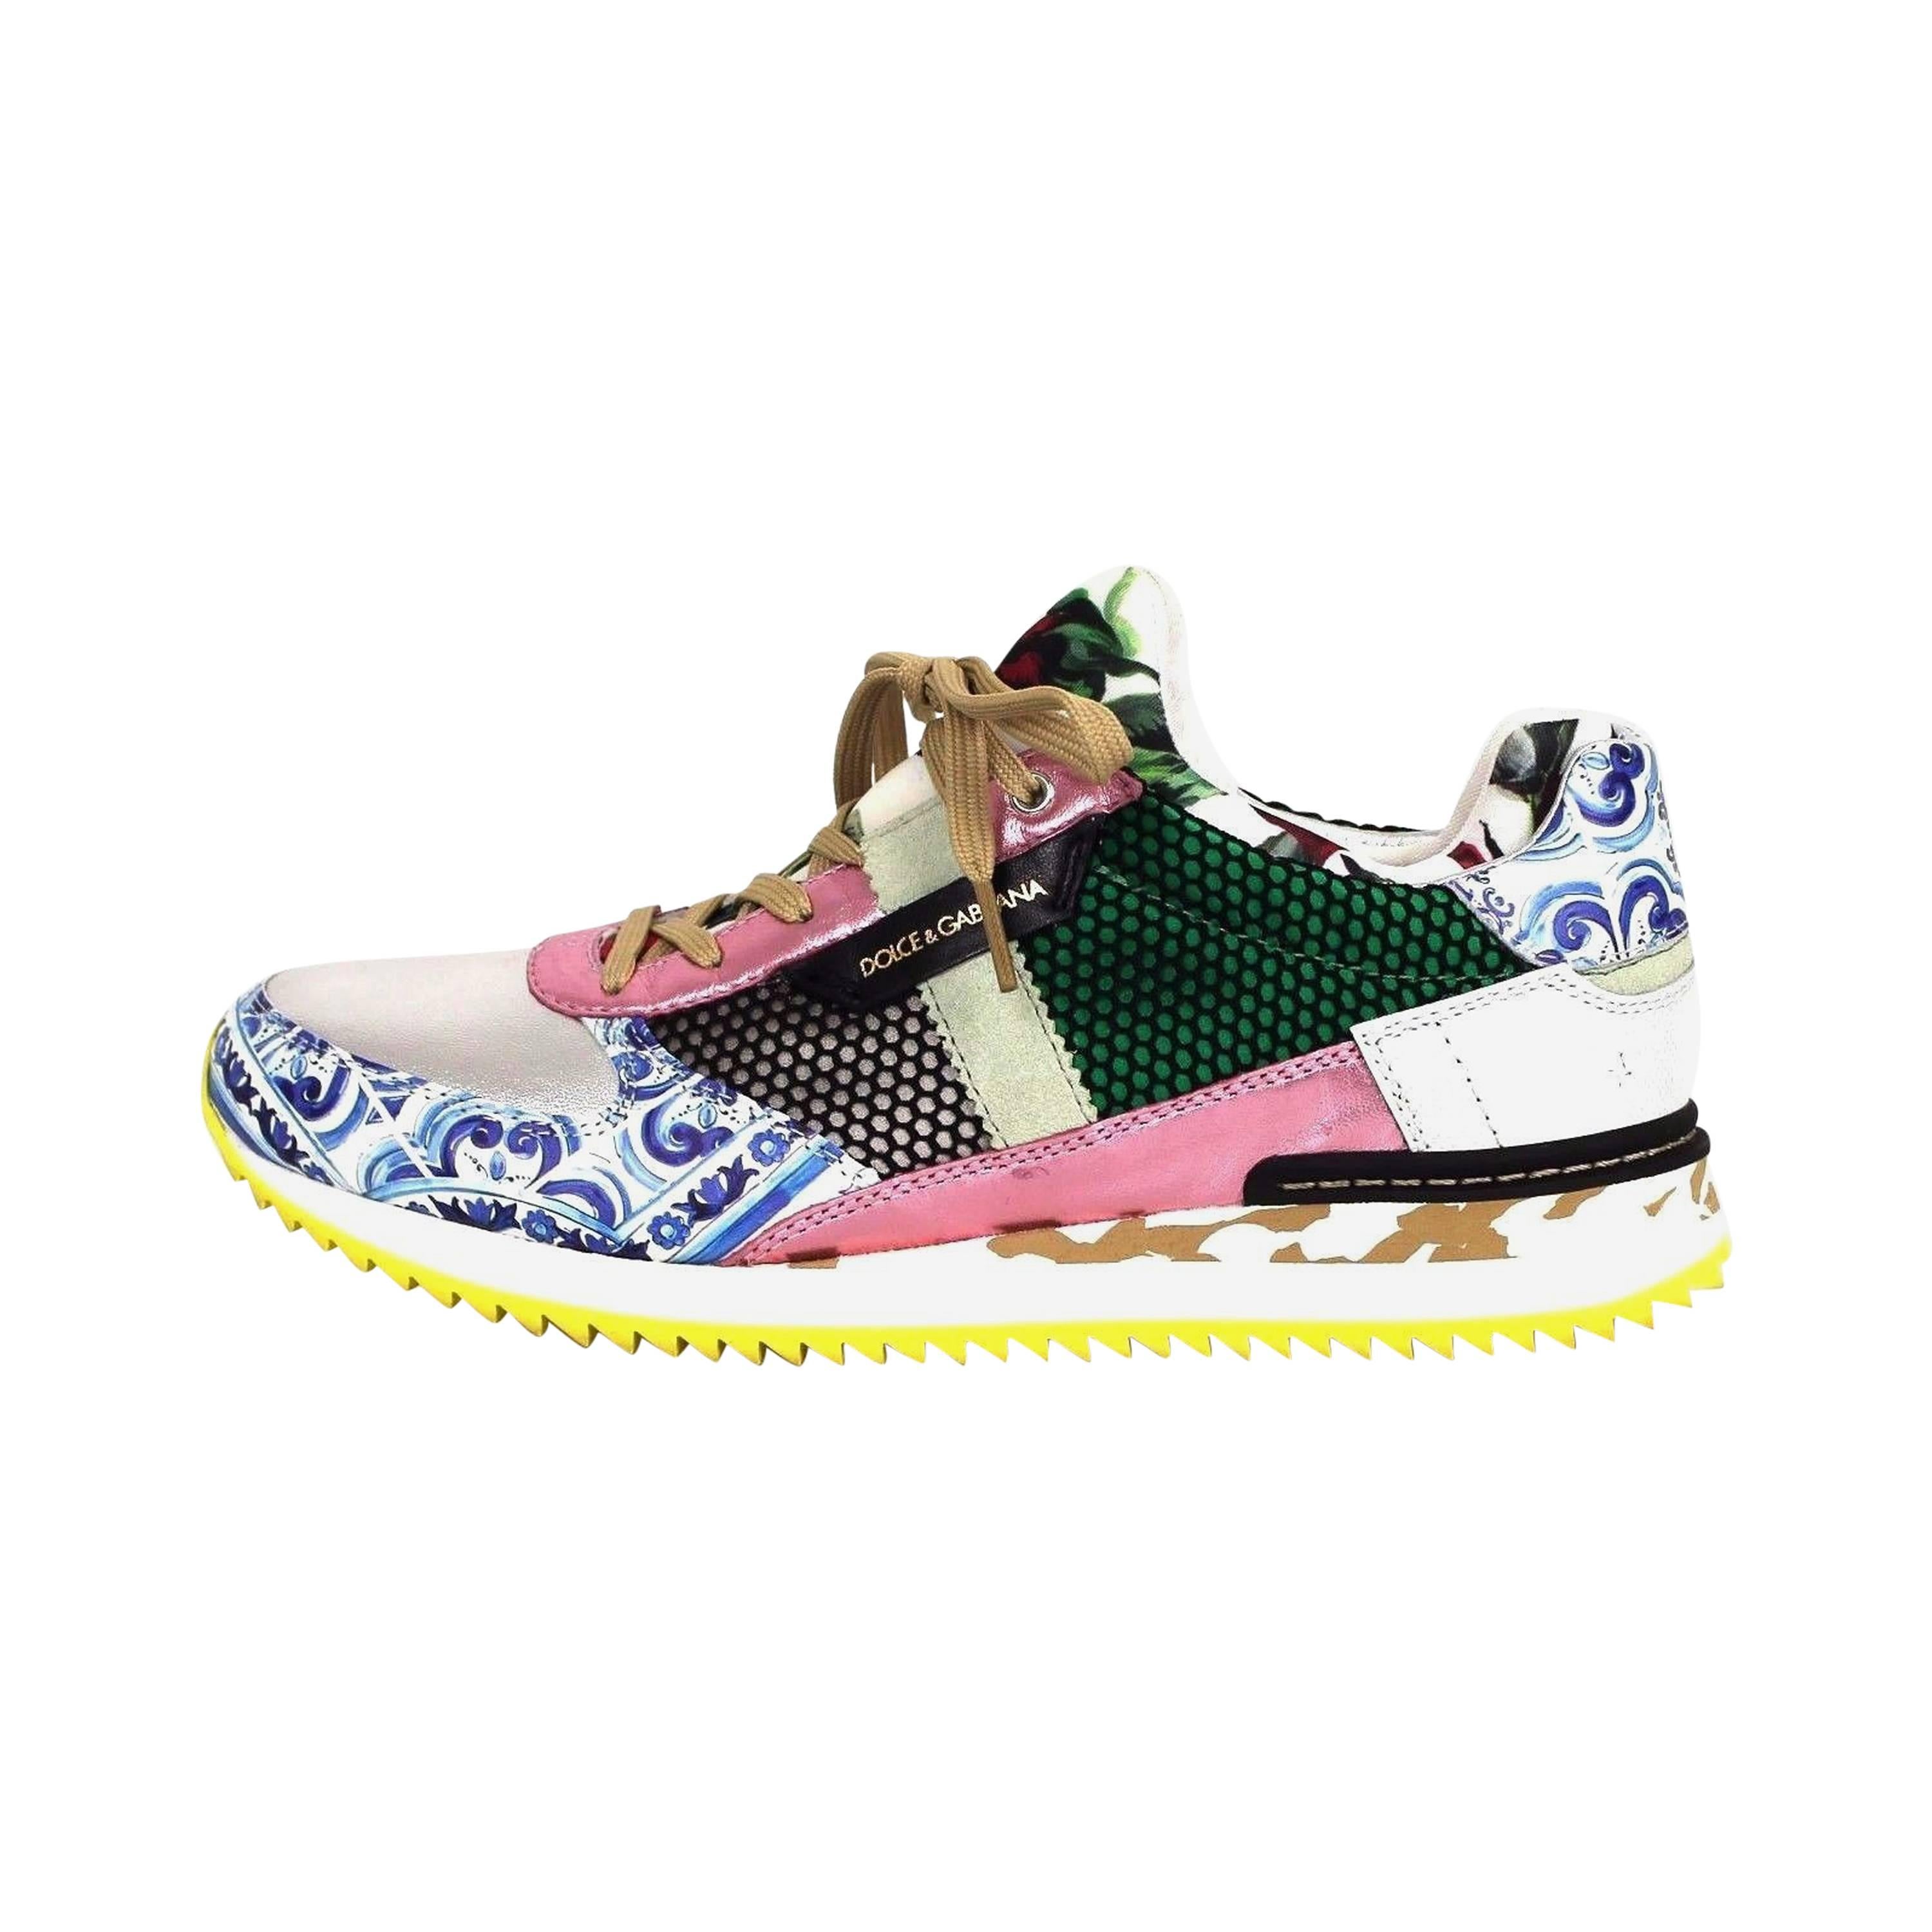 Dolce & Gabbana Multicolor Textile Leather Printed 2015  Mailica Sneakers For Sale